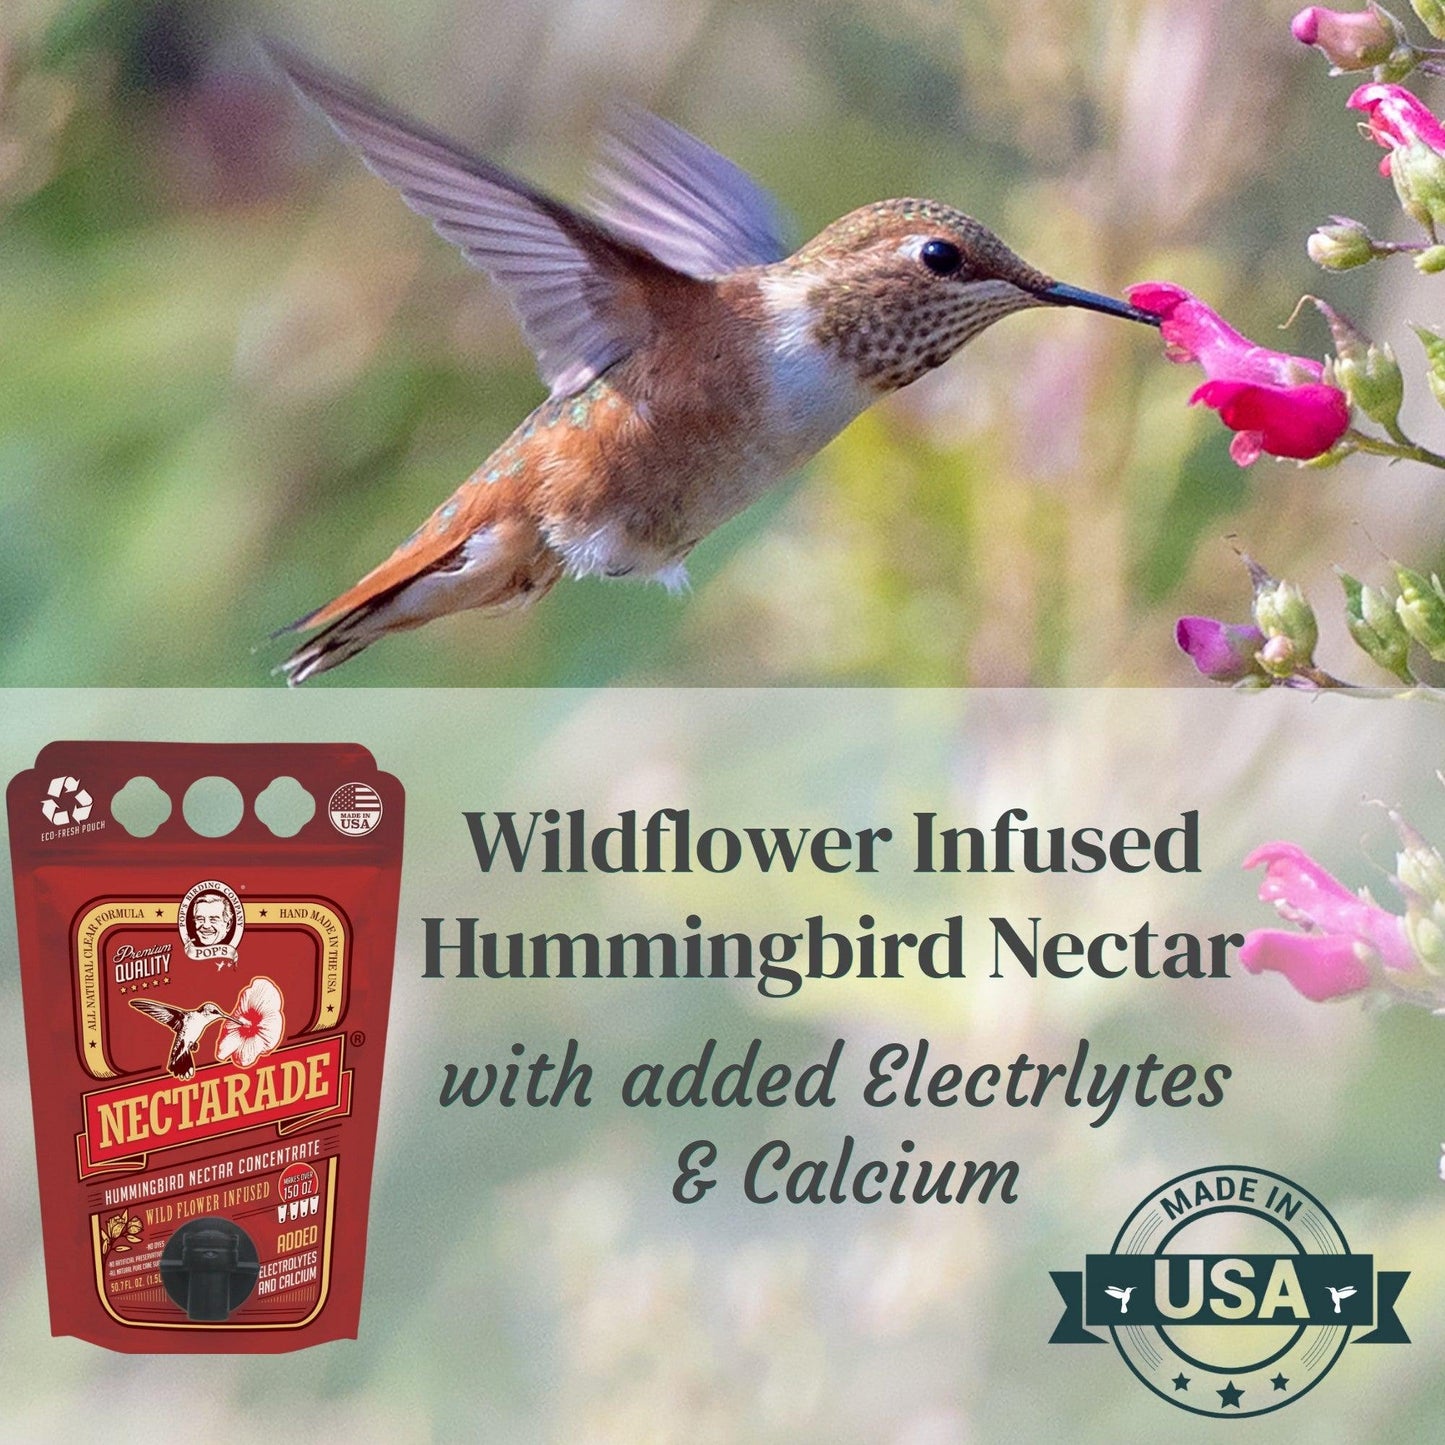 Nectarade® Hummingbird Nectar, Concentrate 50.7oz (Sold by Case)